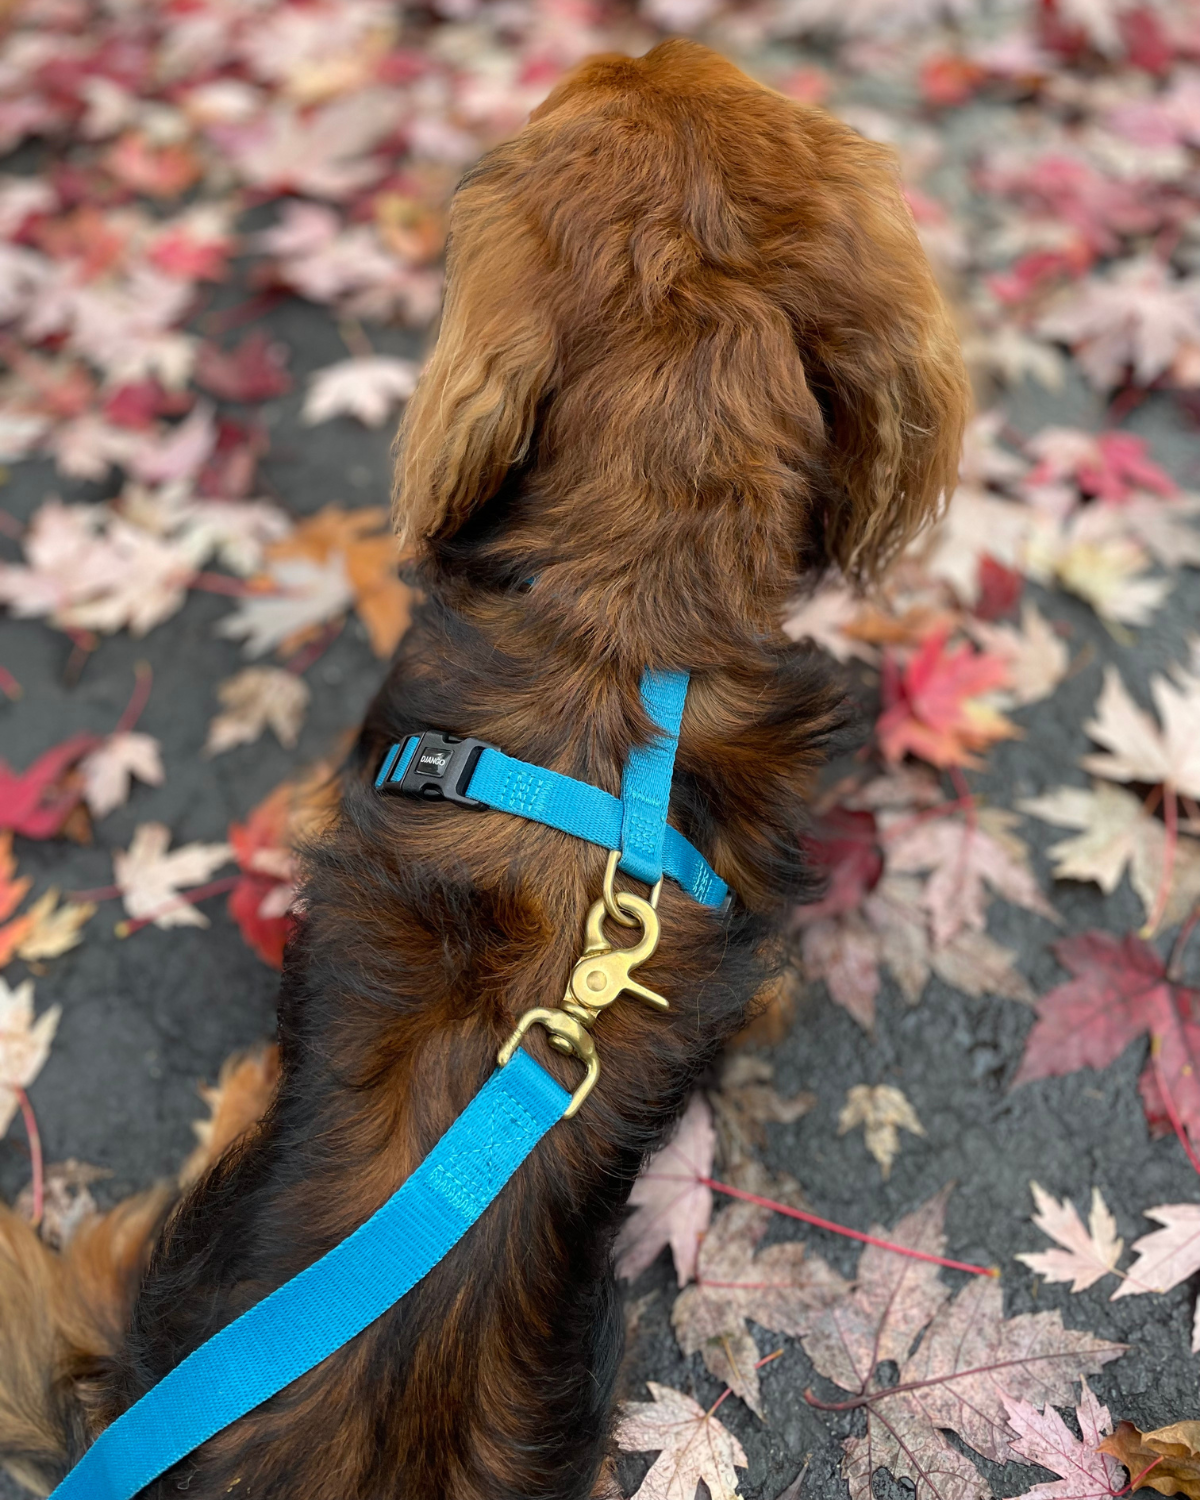 DJANGO's Adventure Dog Leash features beautiful solid cast hardware that pairs perfectly with your favorite DJANGO Adventure Dog Harness and Collar - djangobrand.com